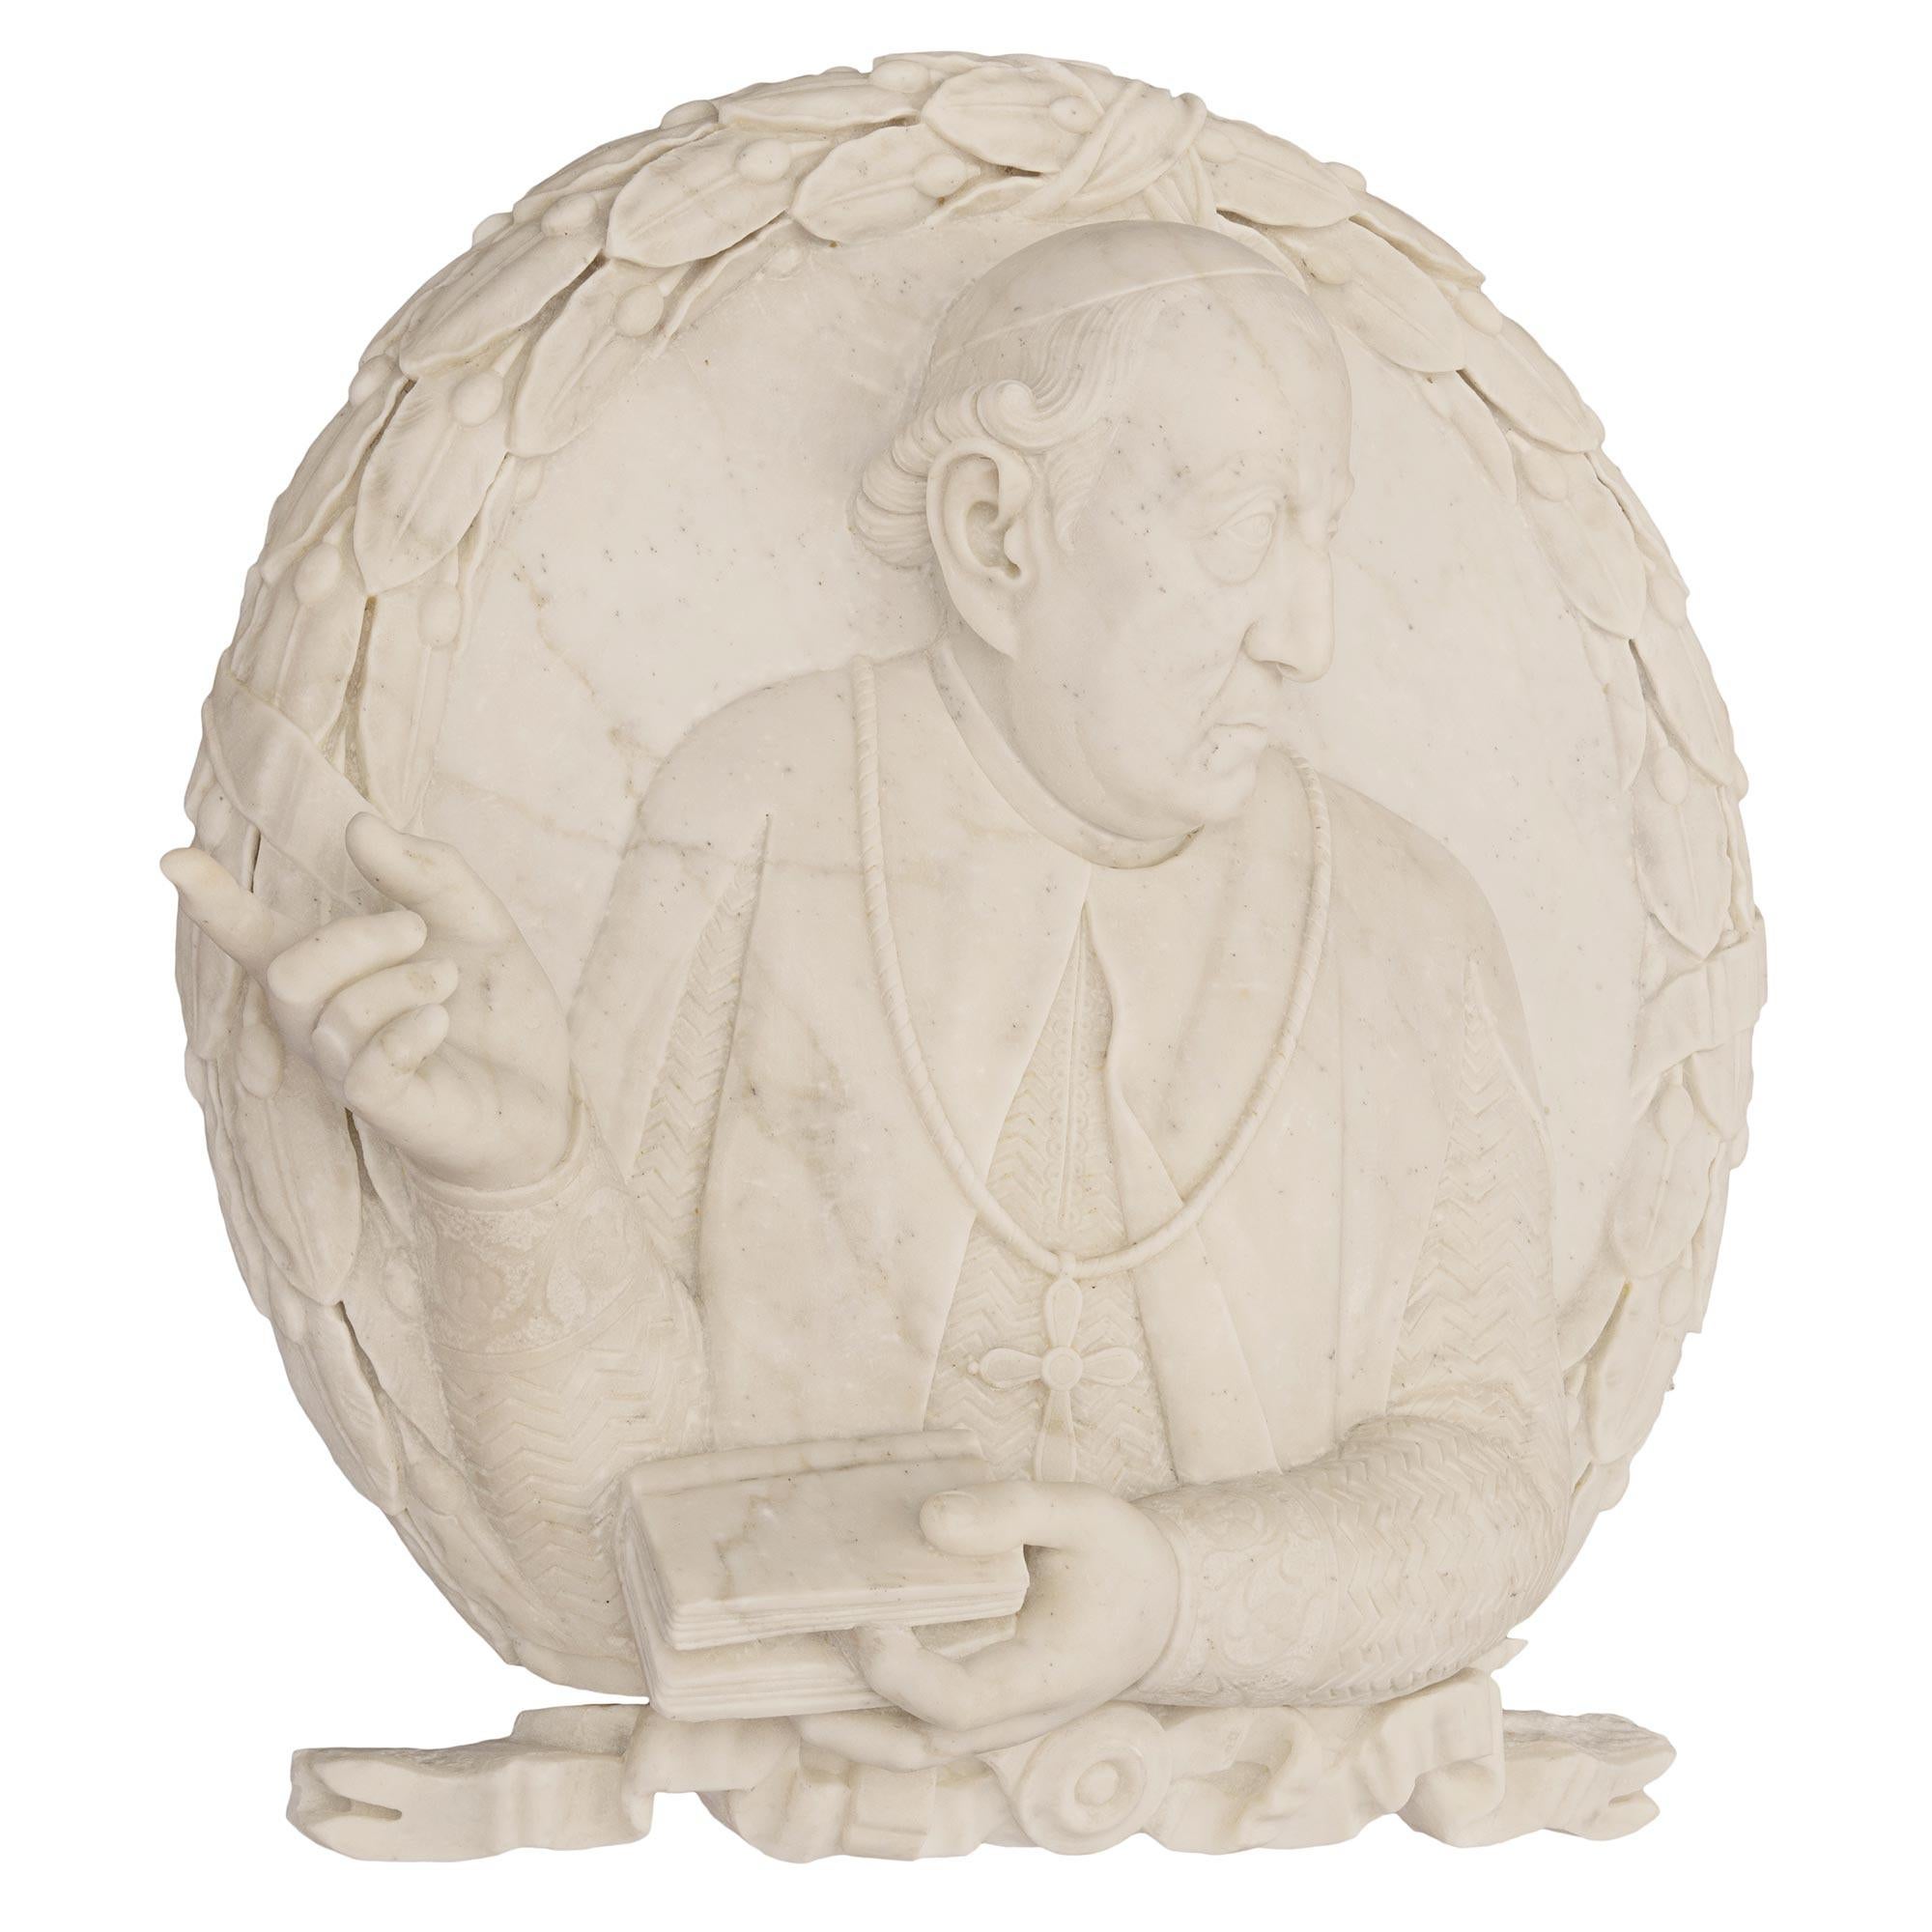 A striking and finely detailed Italian 19th century white Carrara marble decorative wall plaque of a pope. The plaque, sculpted out of one solid piece of white Carrara marble, depicts a Pope at the center dressed in his traditional cassock with a